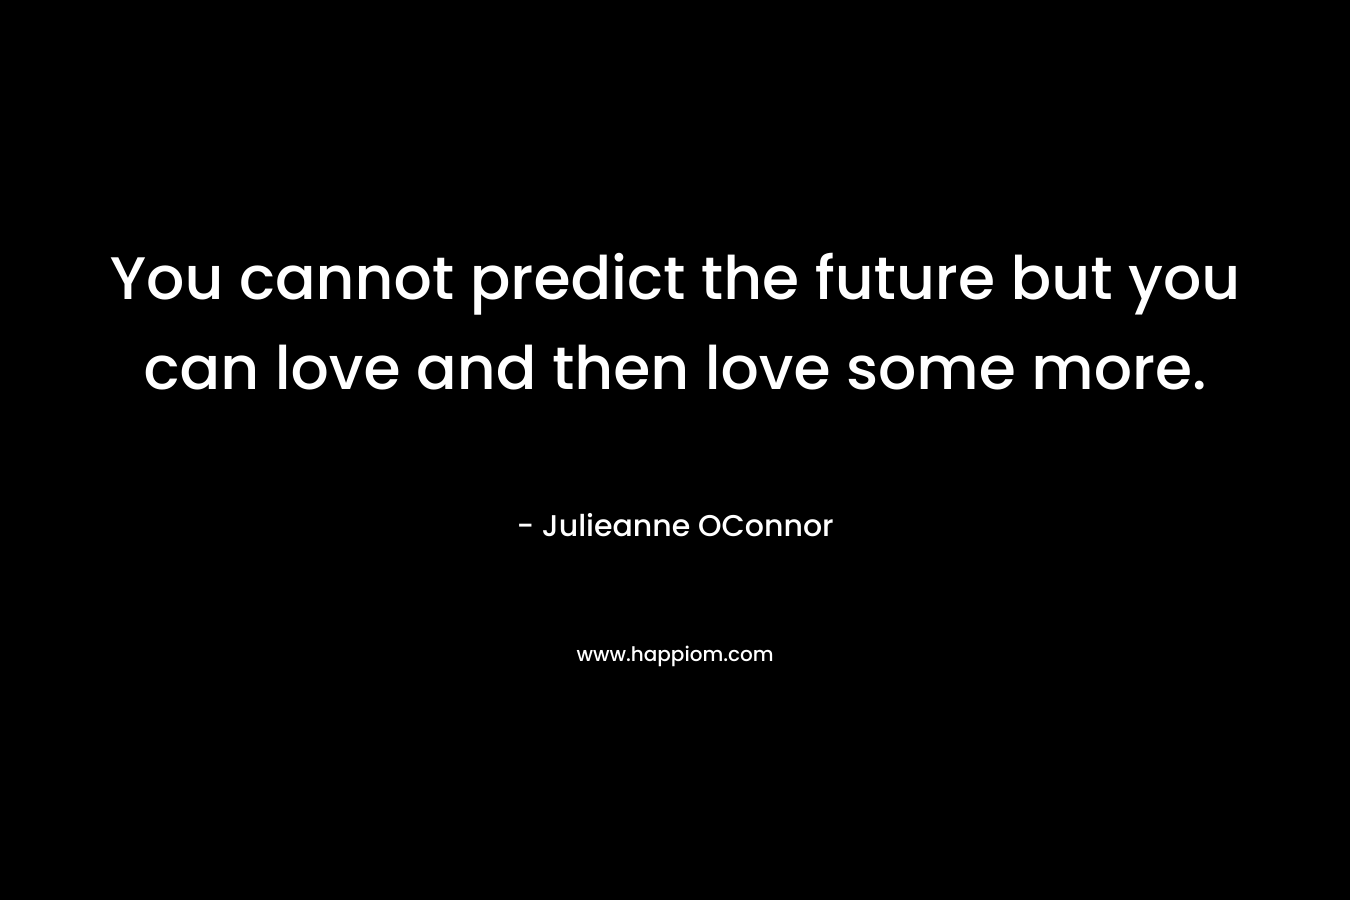 You cannot predict the future but you can love and then love some more. – Julieanne OConnor